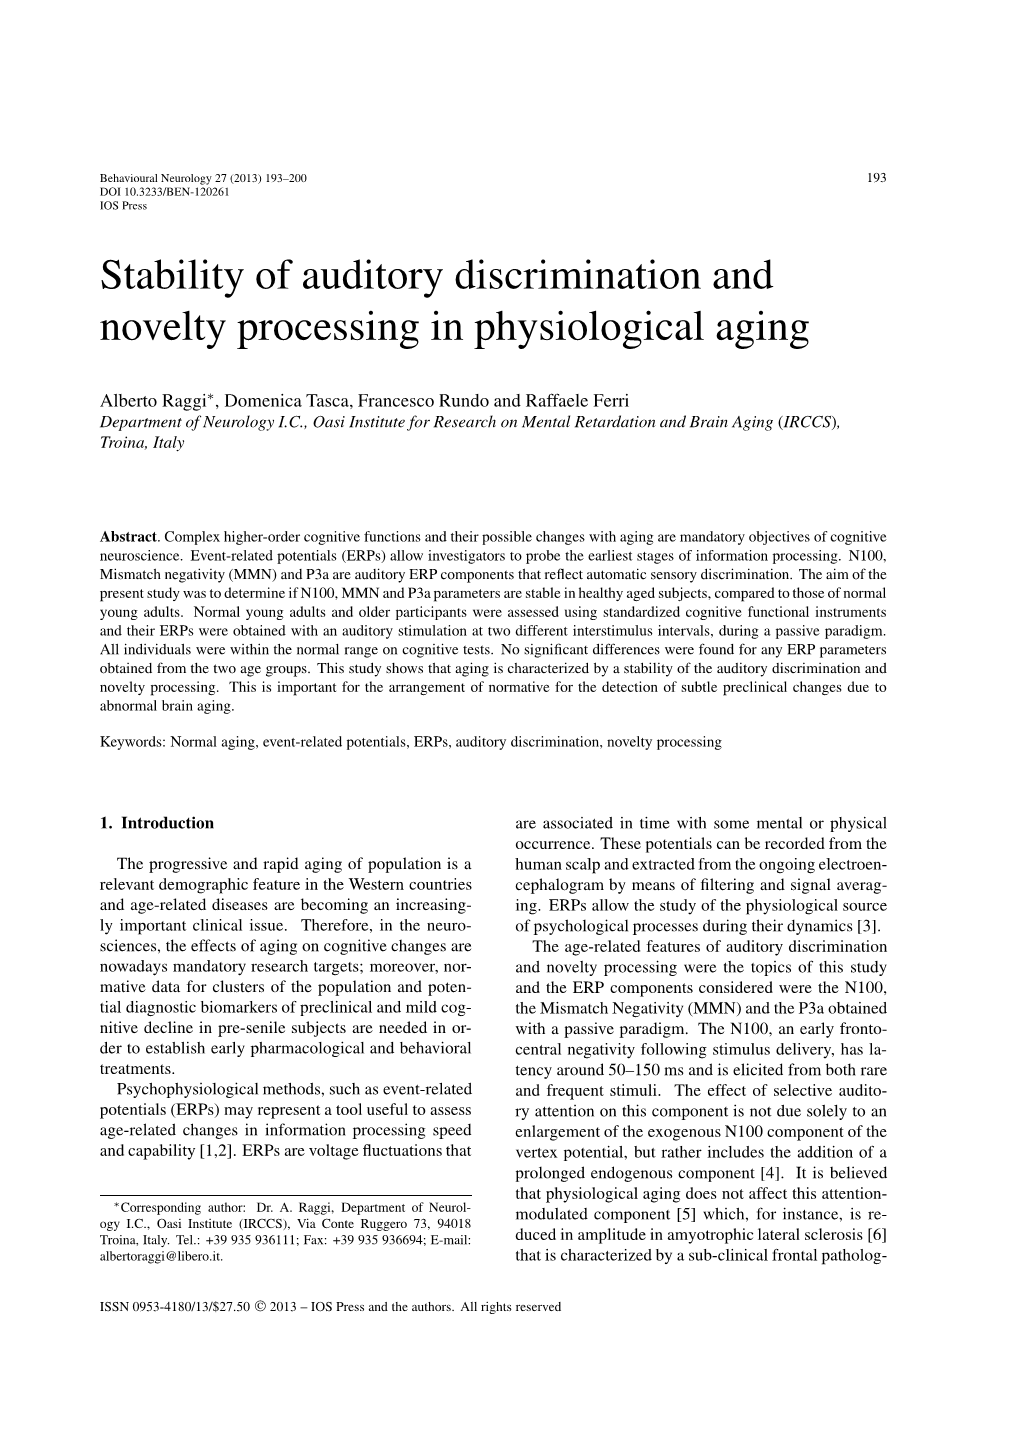 Stability of Auditory Discrimination and Novelty Processing in Physiological Aging